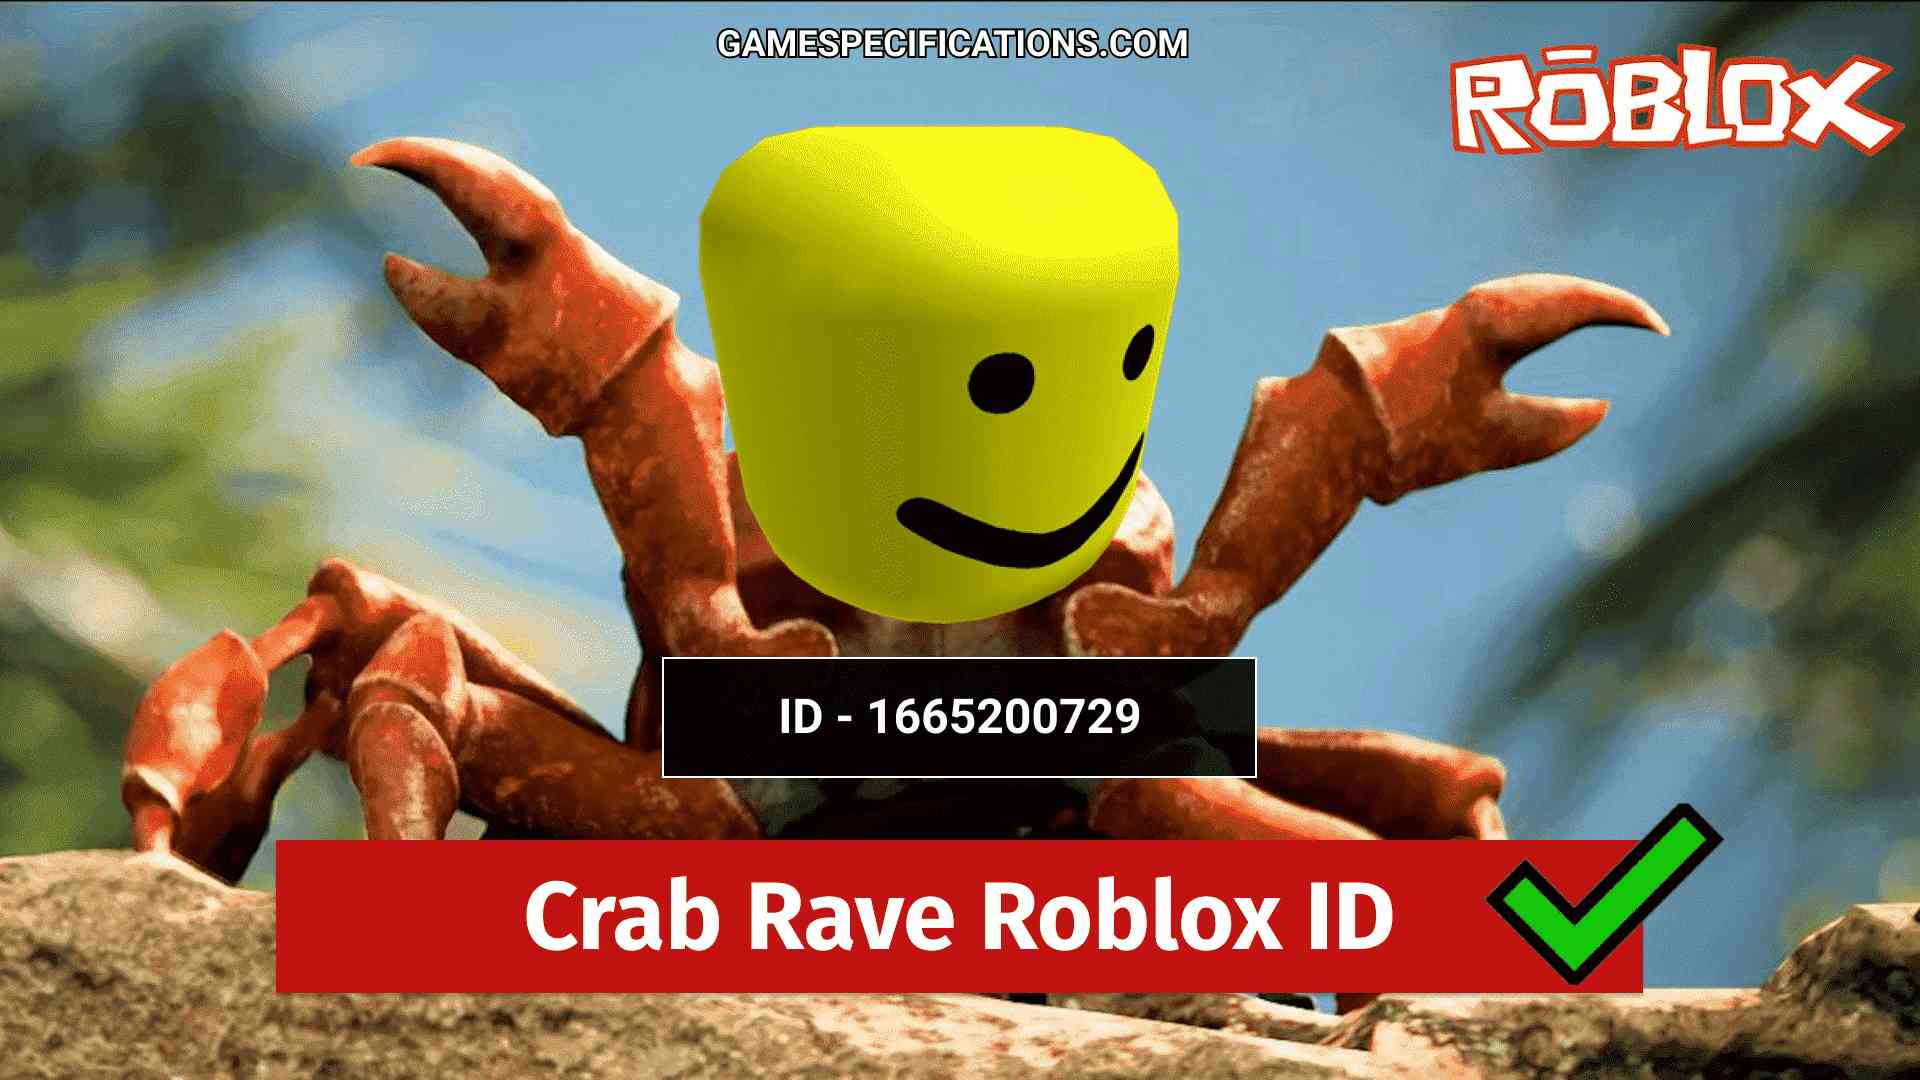 10 Best Crab Rave Roblox Id Codes Parody Remix Included Game Specifications - roblox oof songs id